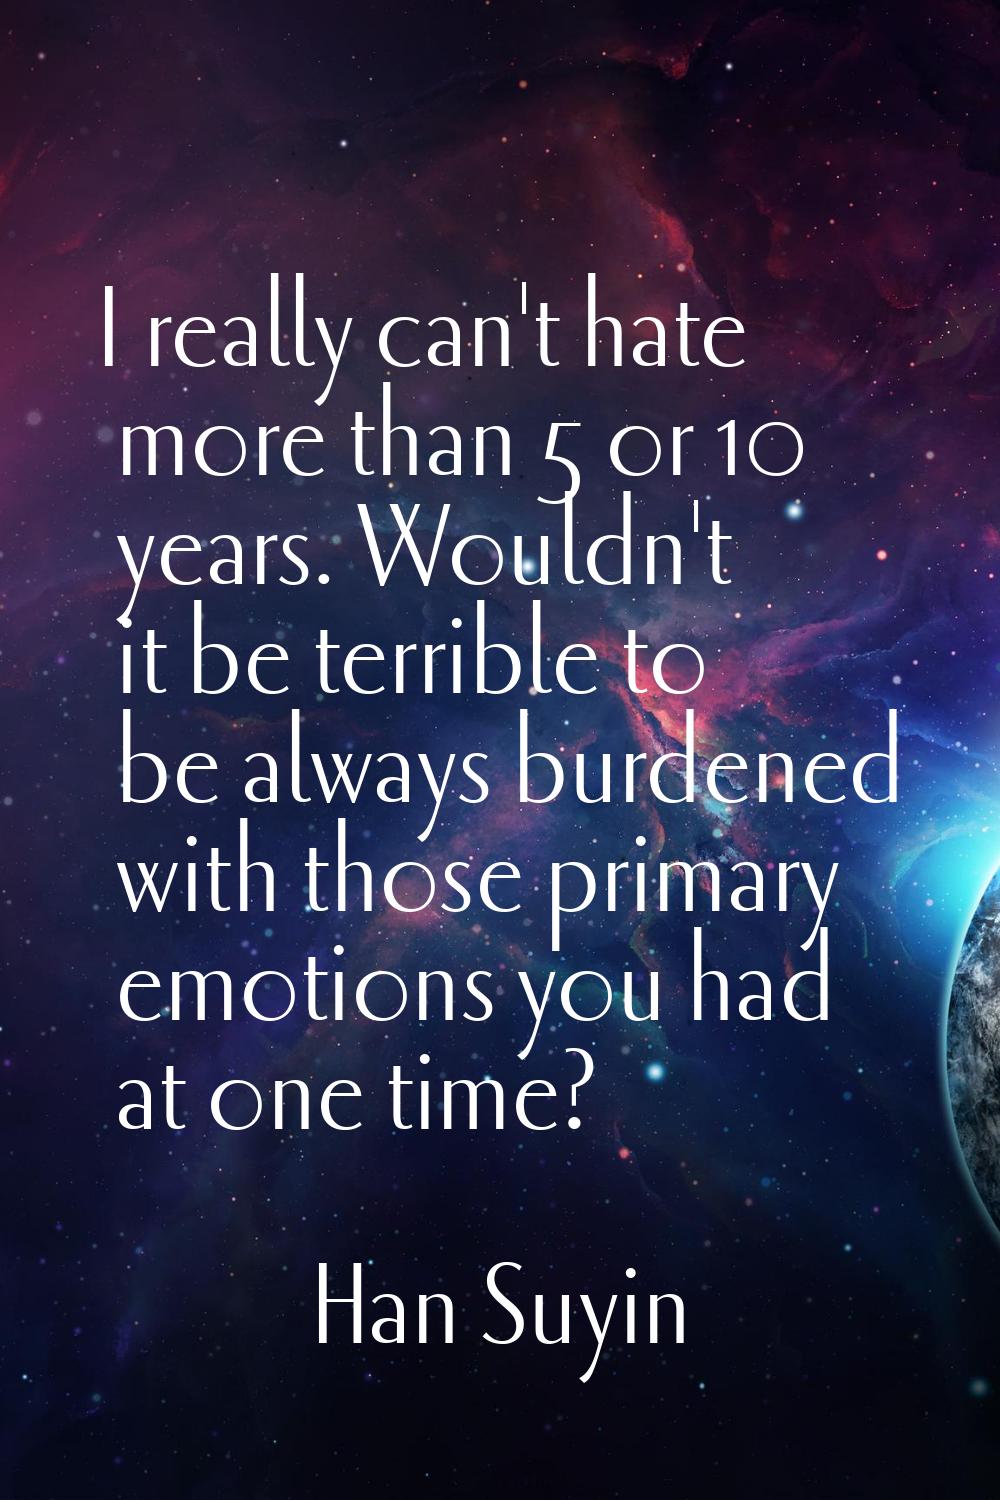 I really can't hate more than 5 or 10 years. Wouldn't it be terrible to be always burdened with tho